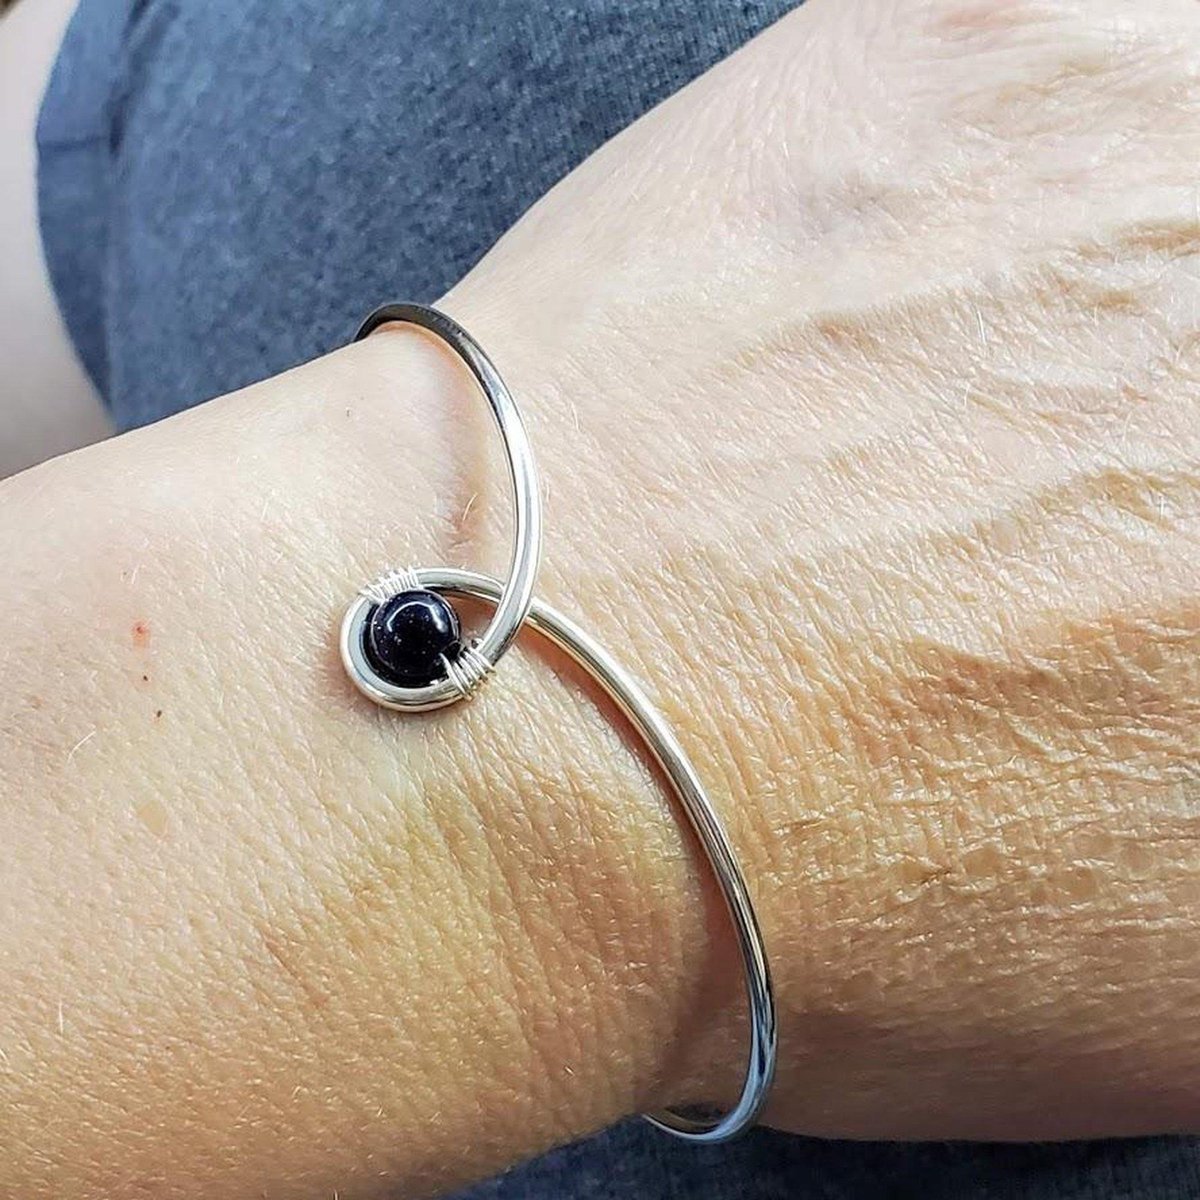 Child Abuse Awareness Teardrop Bangle with Blue Sandstone Bead - Handcrafted Sterling Silver Design with Unique Sparkle Bijou Her